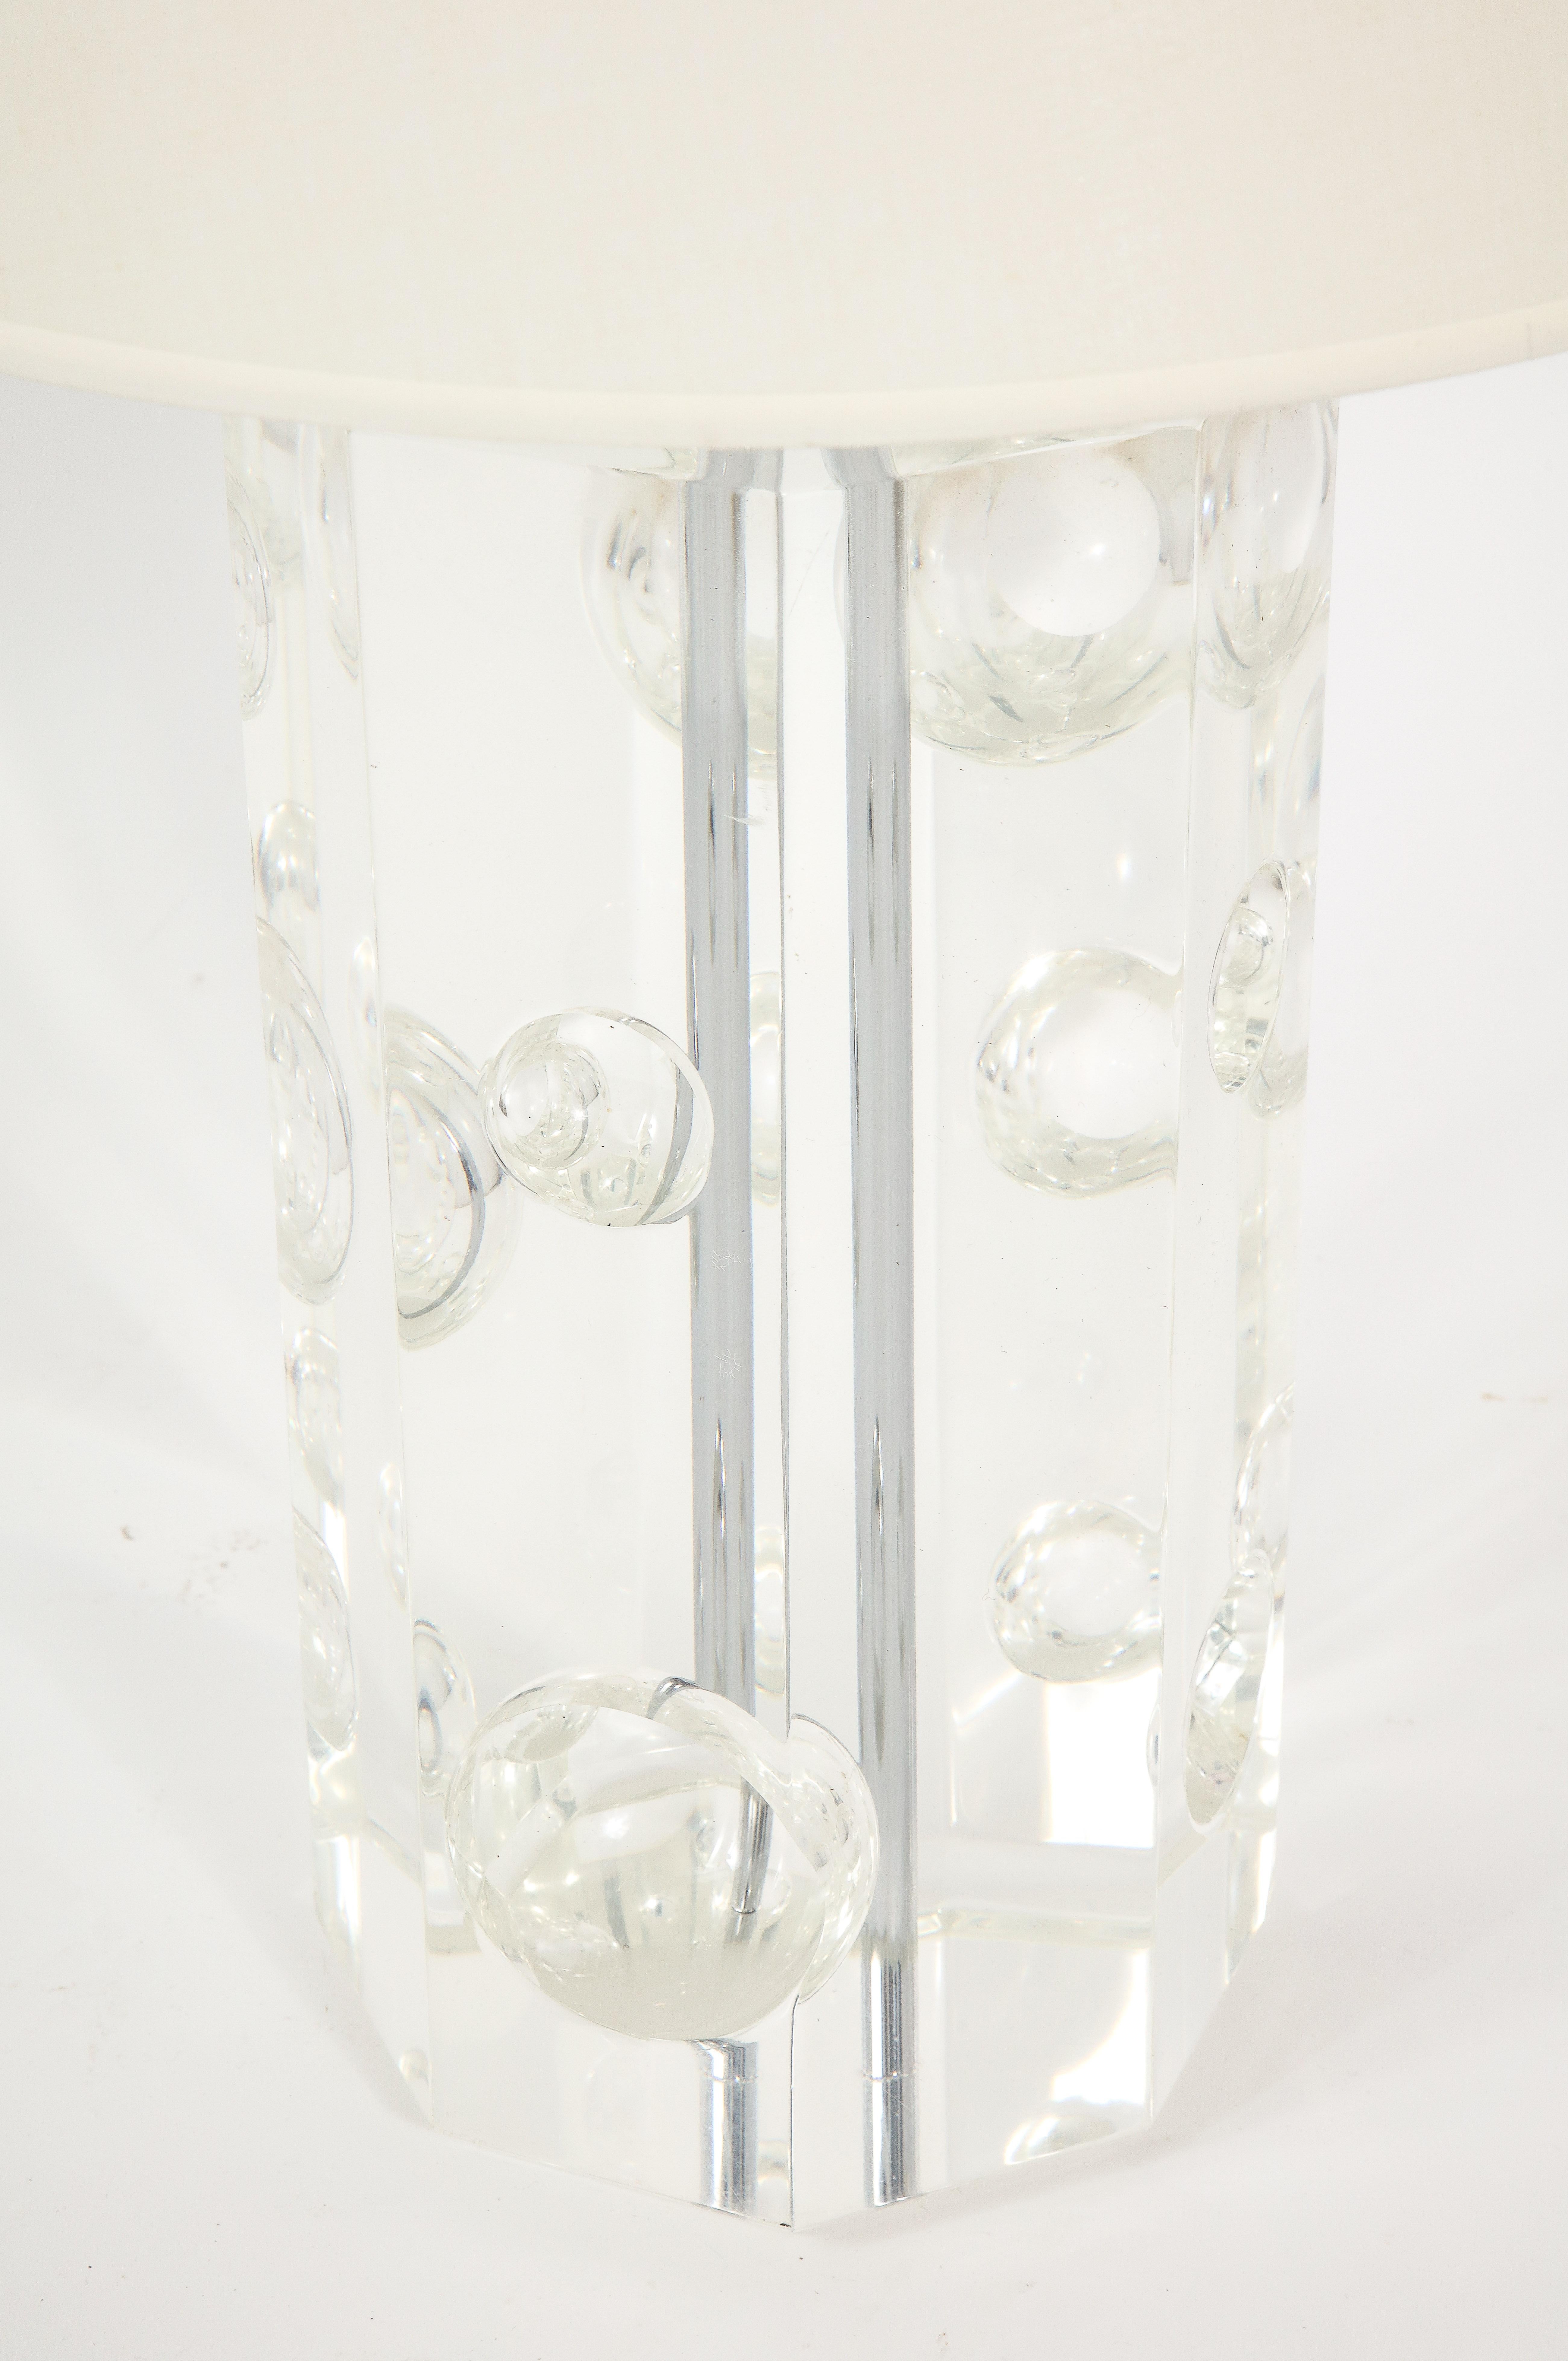 Large Studio Lucite Lamp, USA 1960's For Sale 2